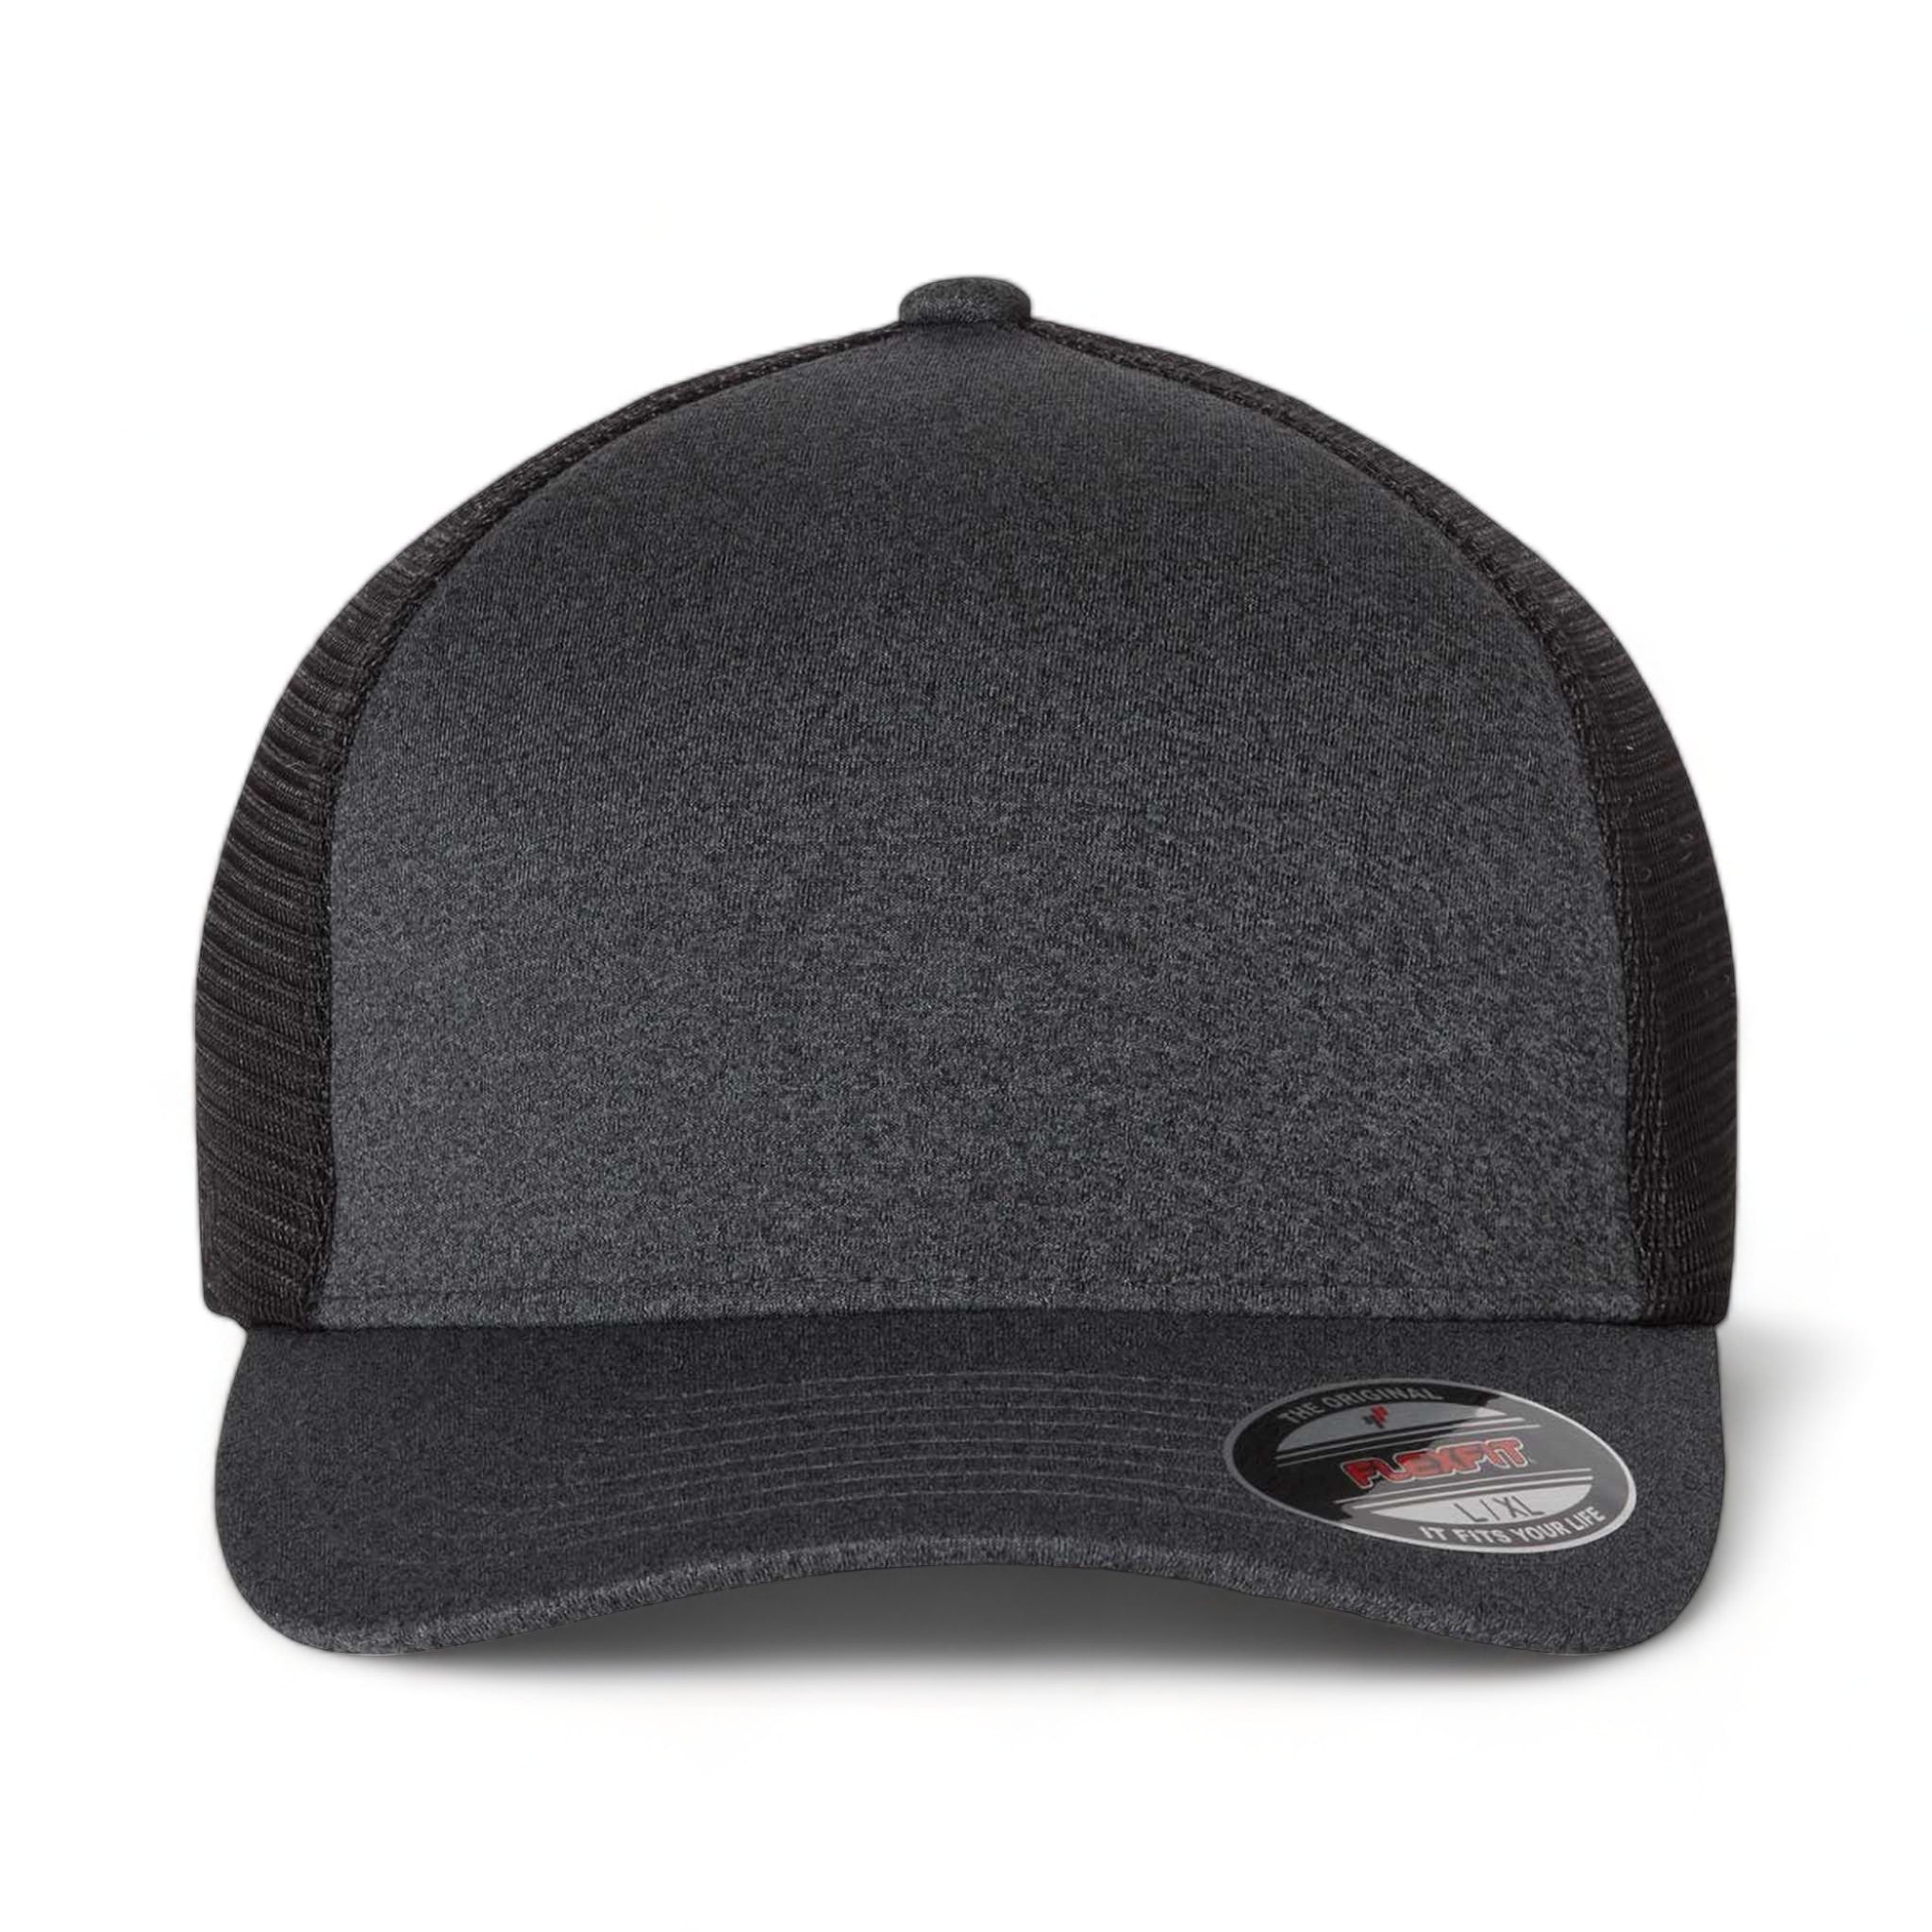 Front view of Flexfit 5511UP custom hat in mélange dark grey and black